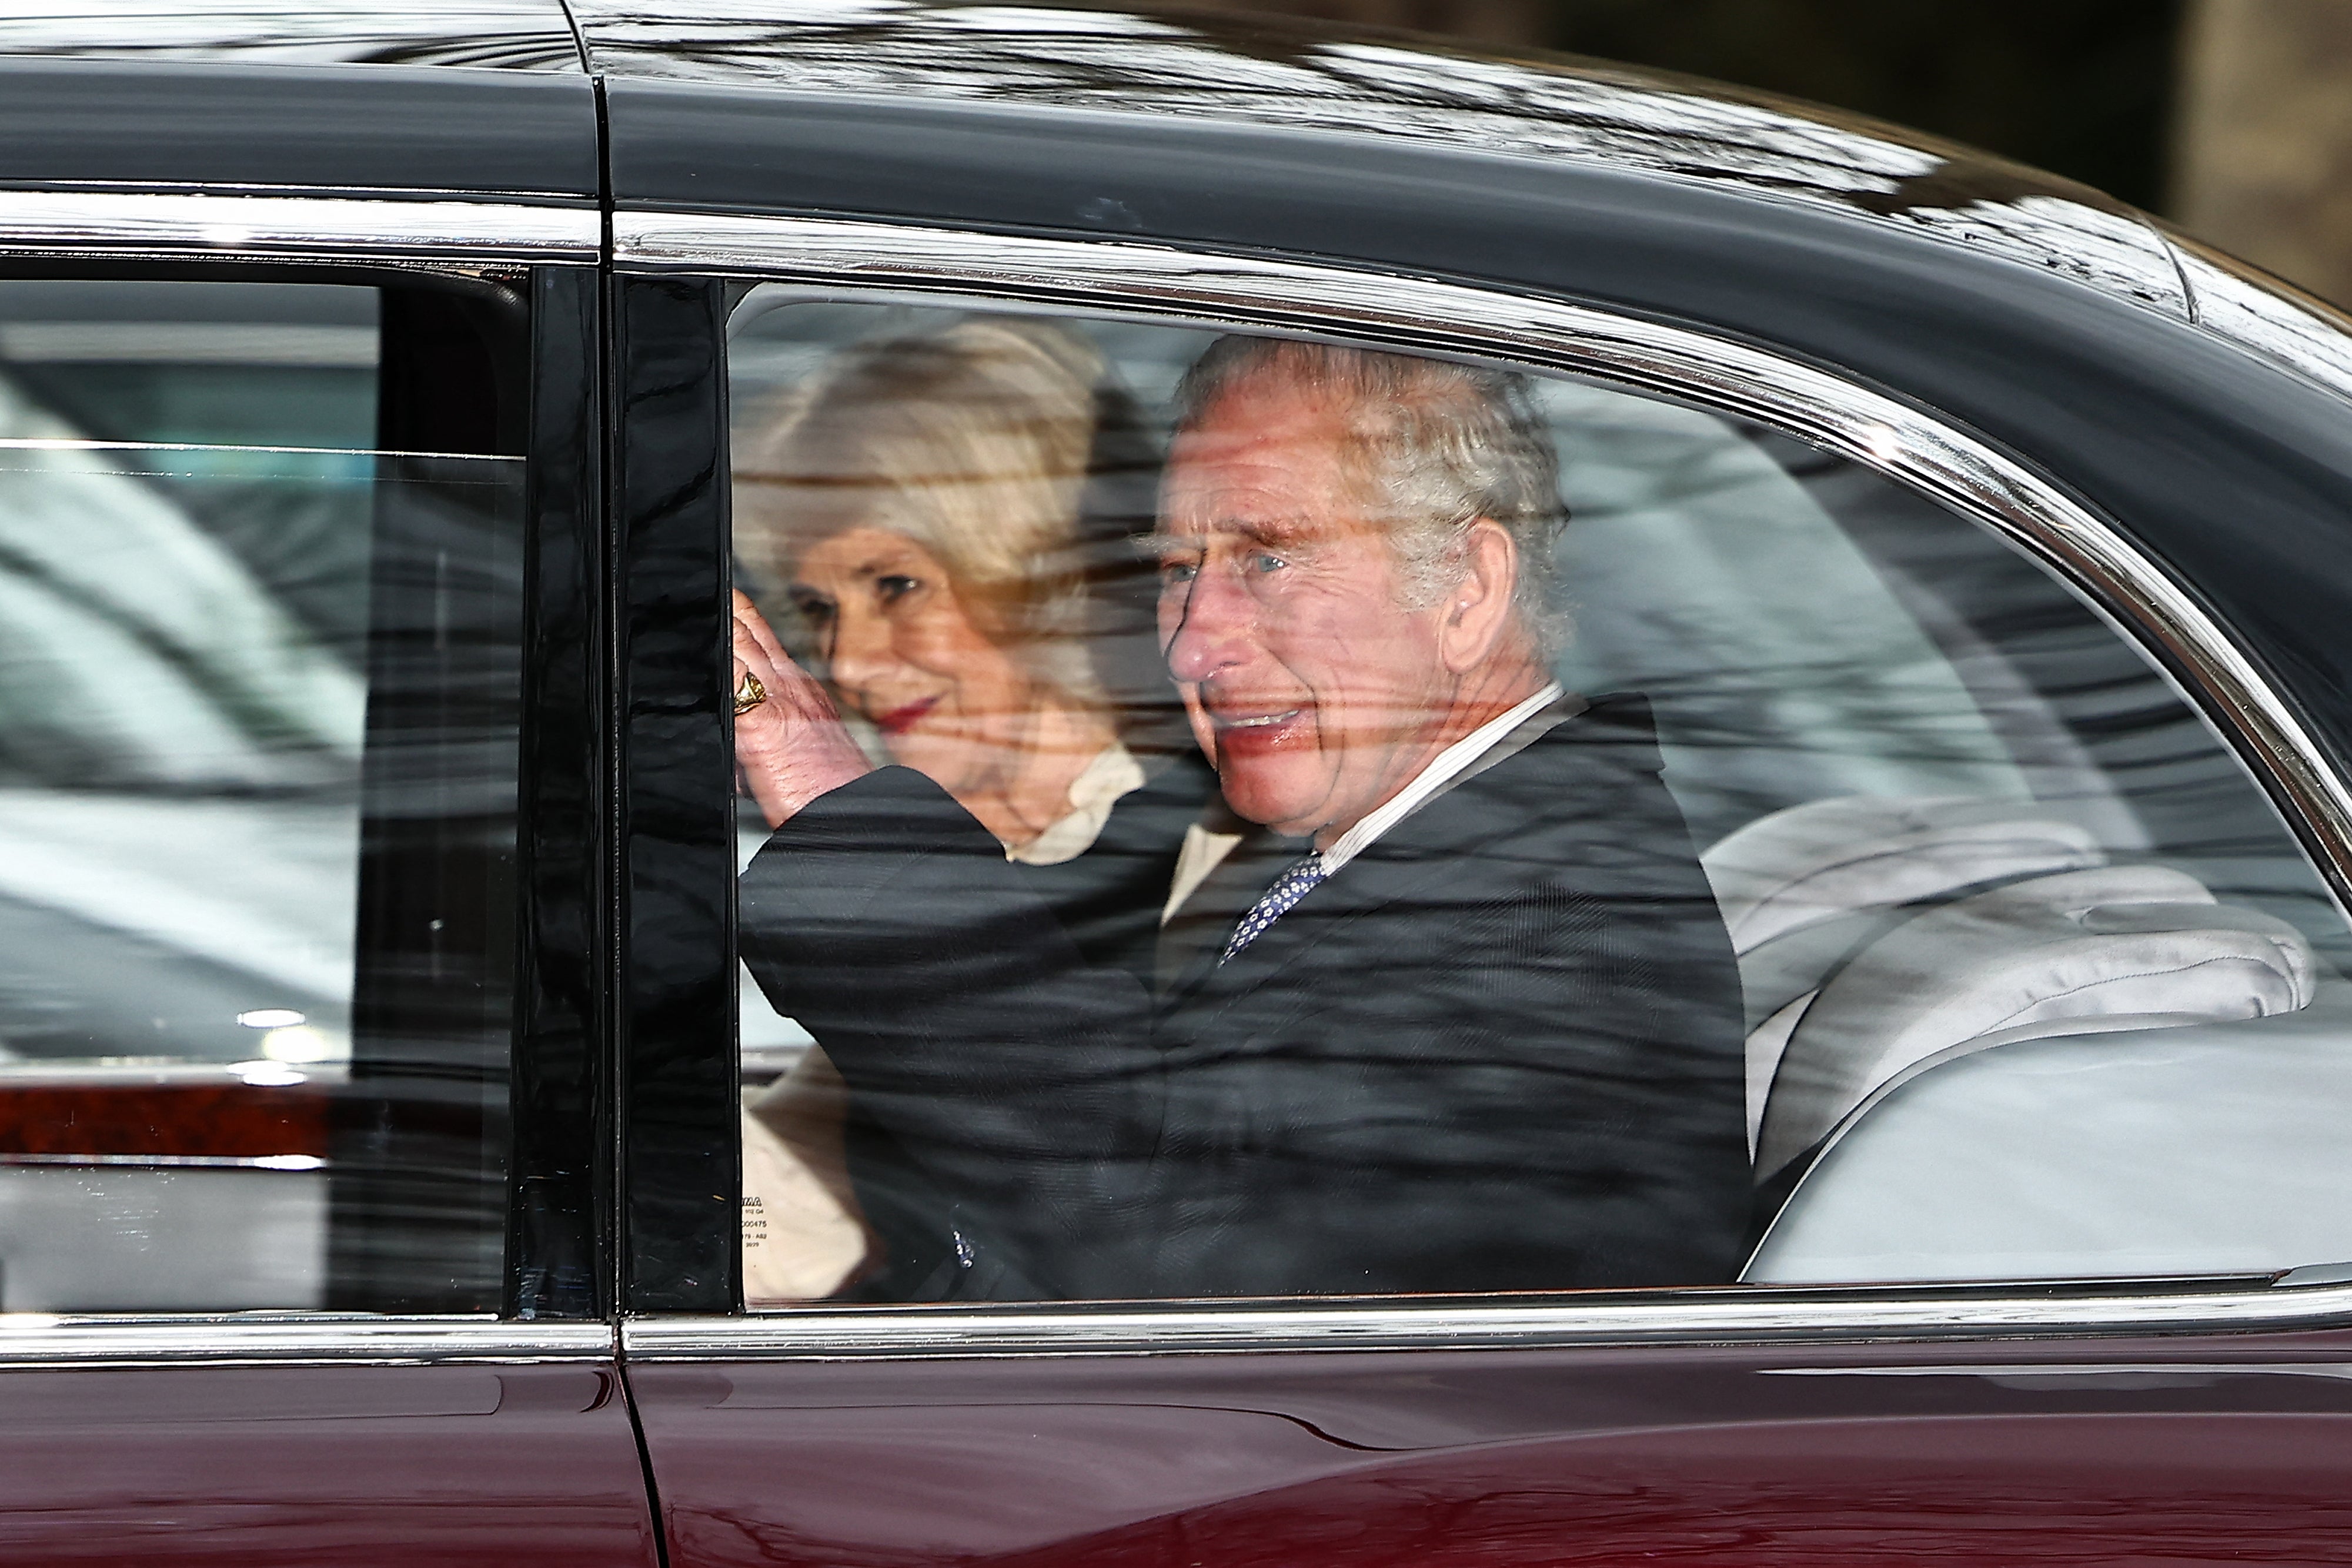 The King waved as he left Clarence House on Tuesday